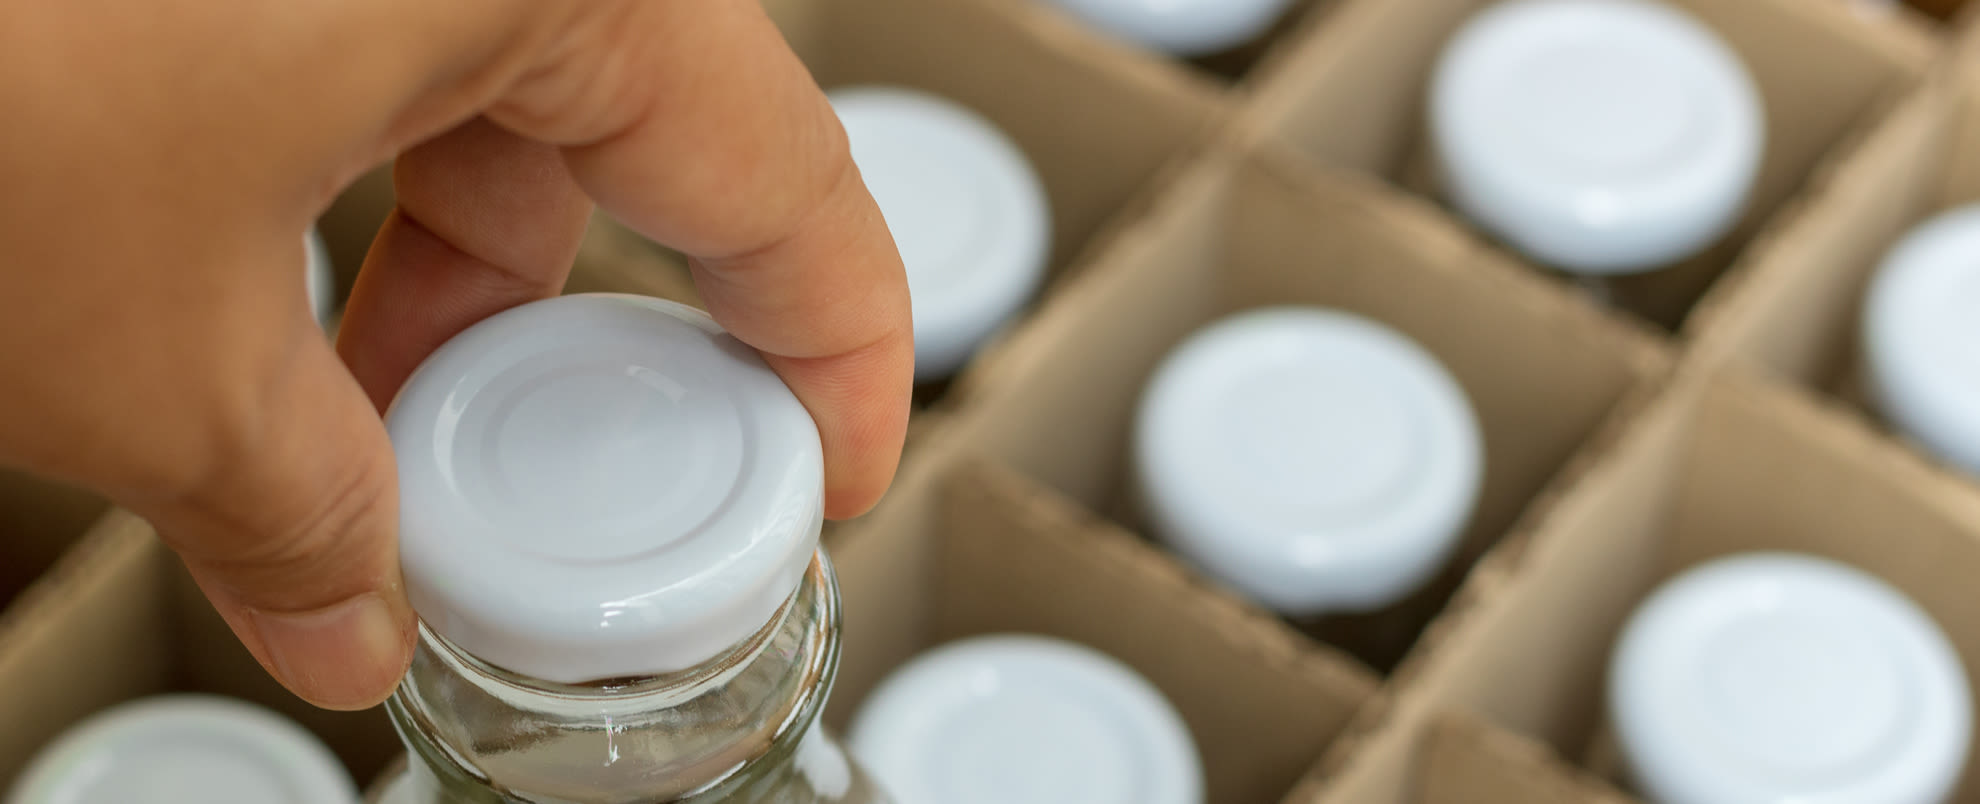 The hand picking a glass bottle with white bottle caps in a cardboard box, Packaging concept.